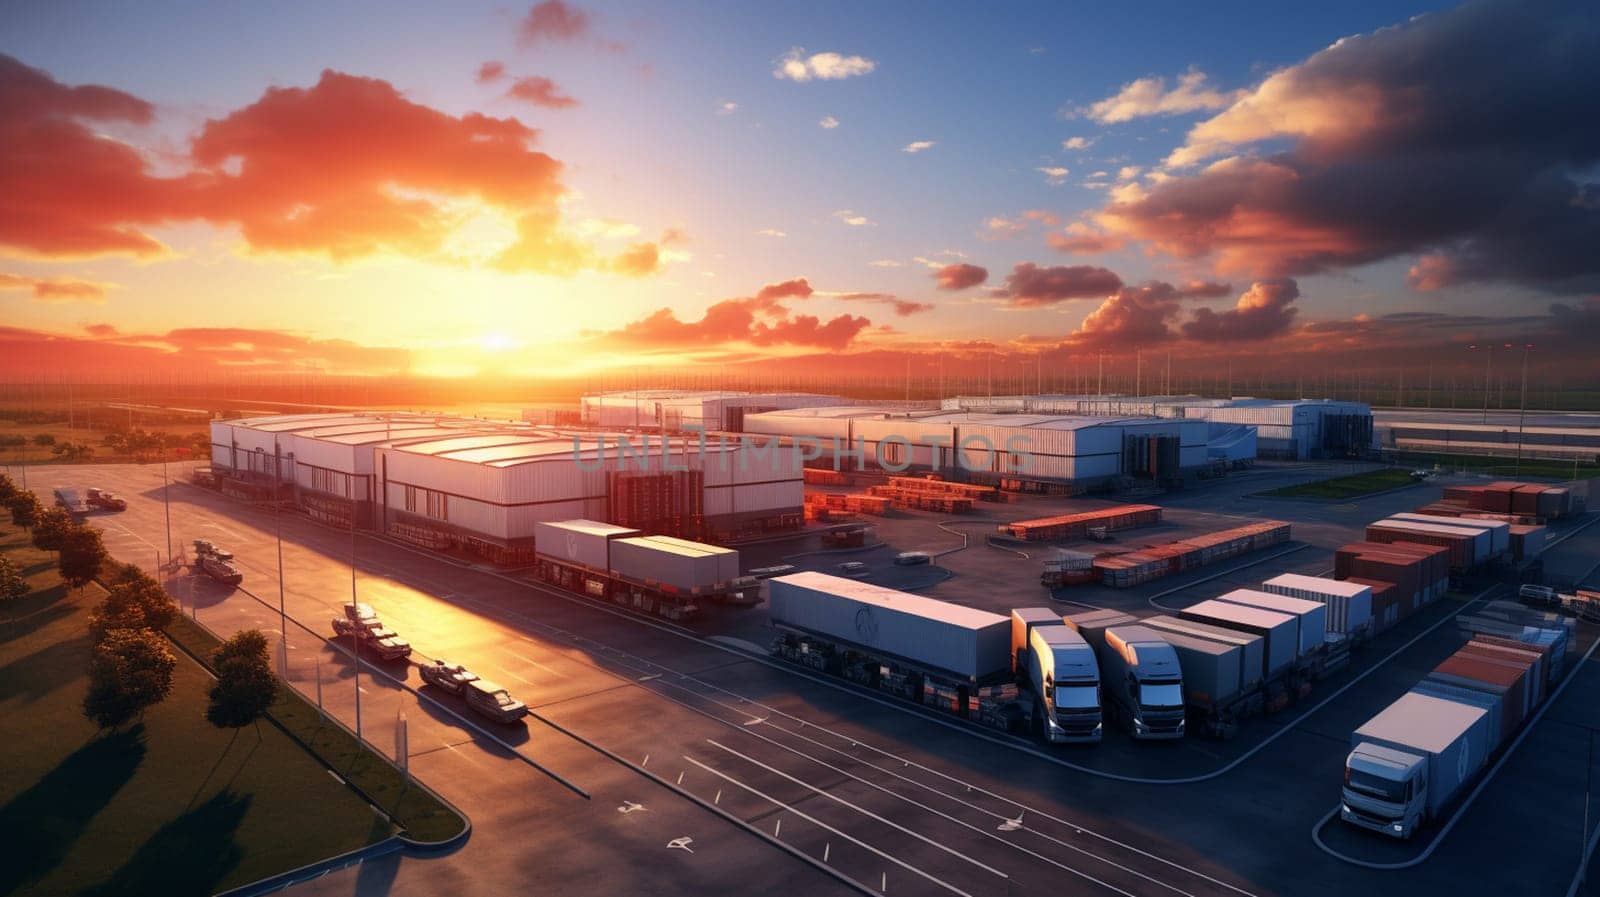 Logistics park with warehouse, loading hub and many semi trucks with cargo trailers standing at the ramps for load unload goods at sunset. by Andelov13